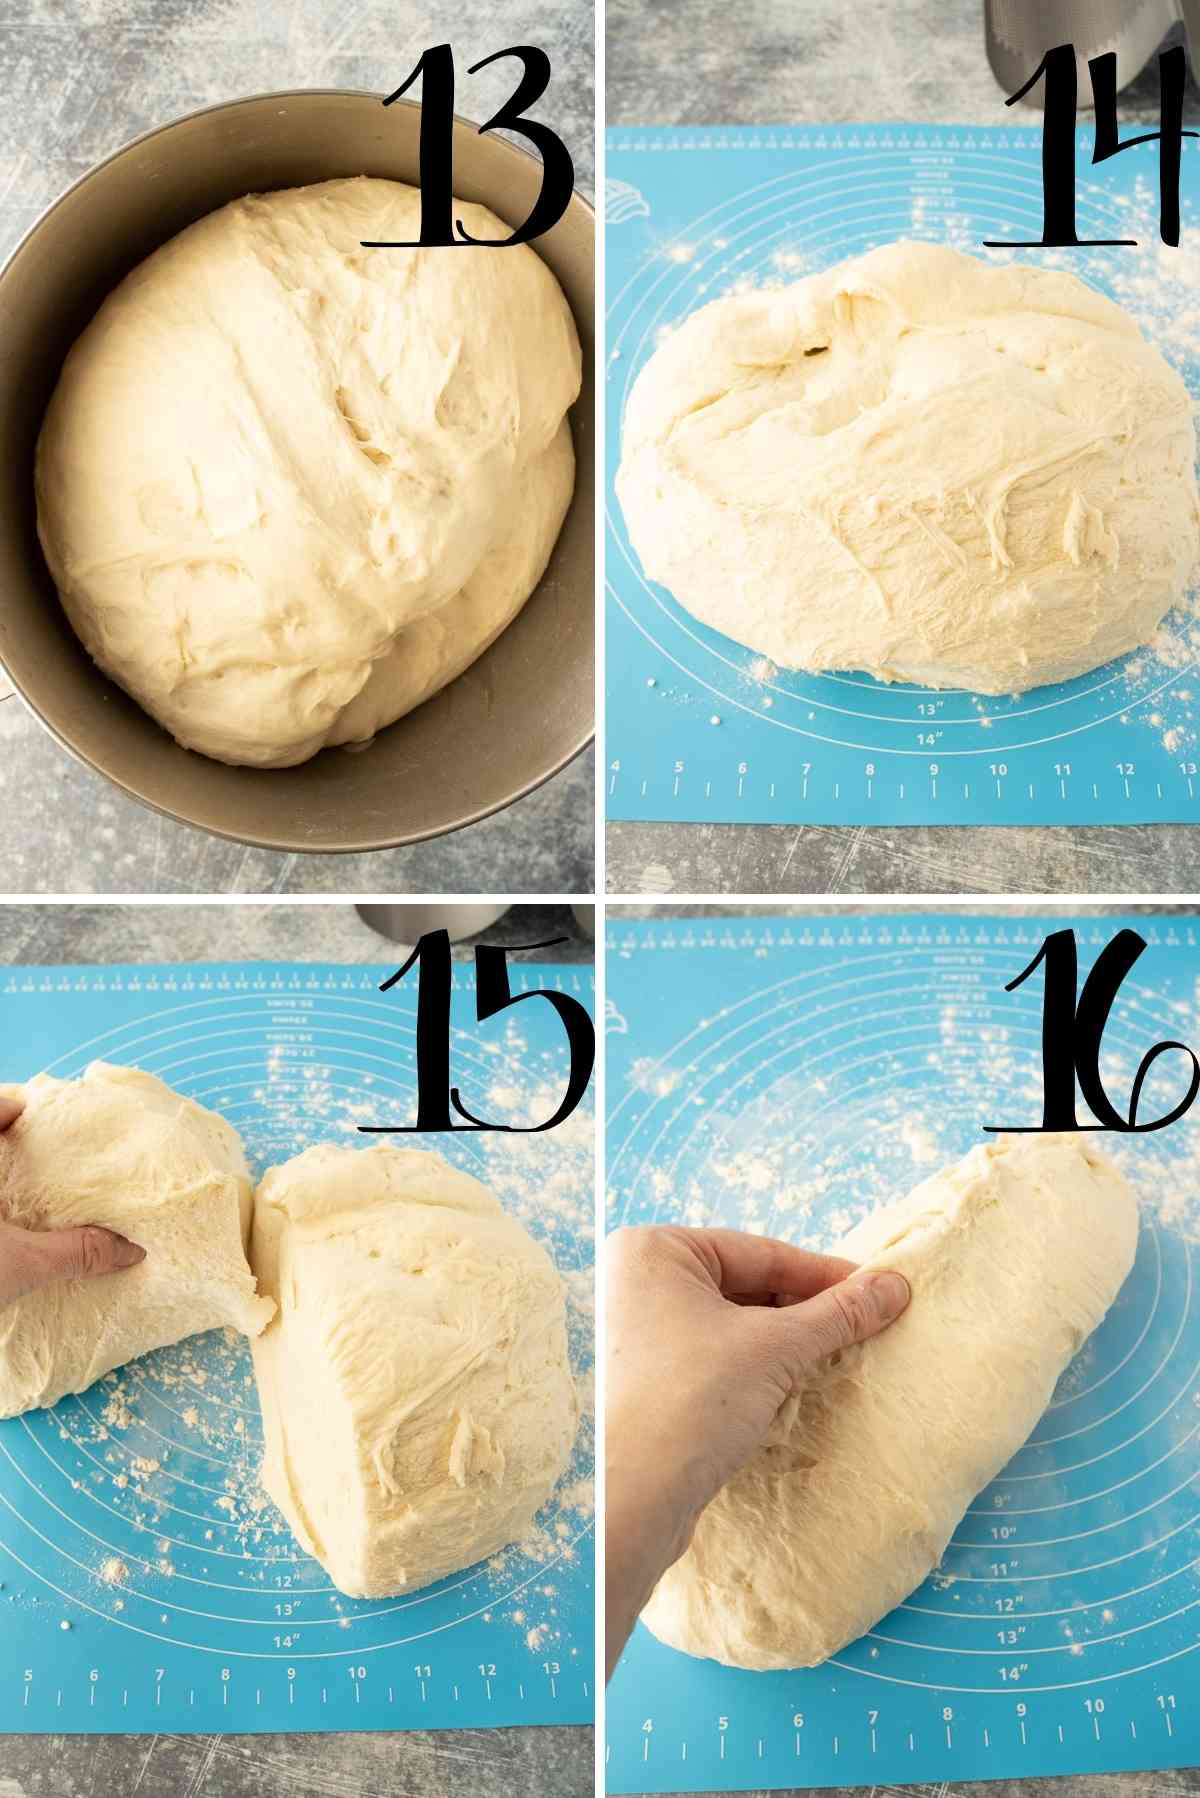 risen dough dumped out, divided in two and shaped into loaves.